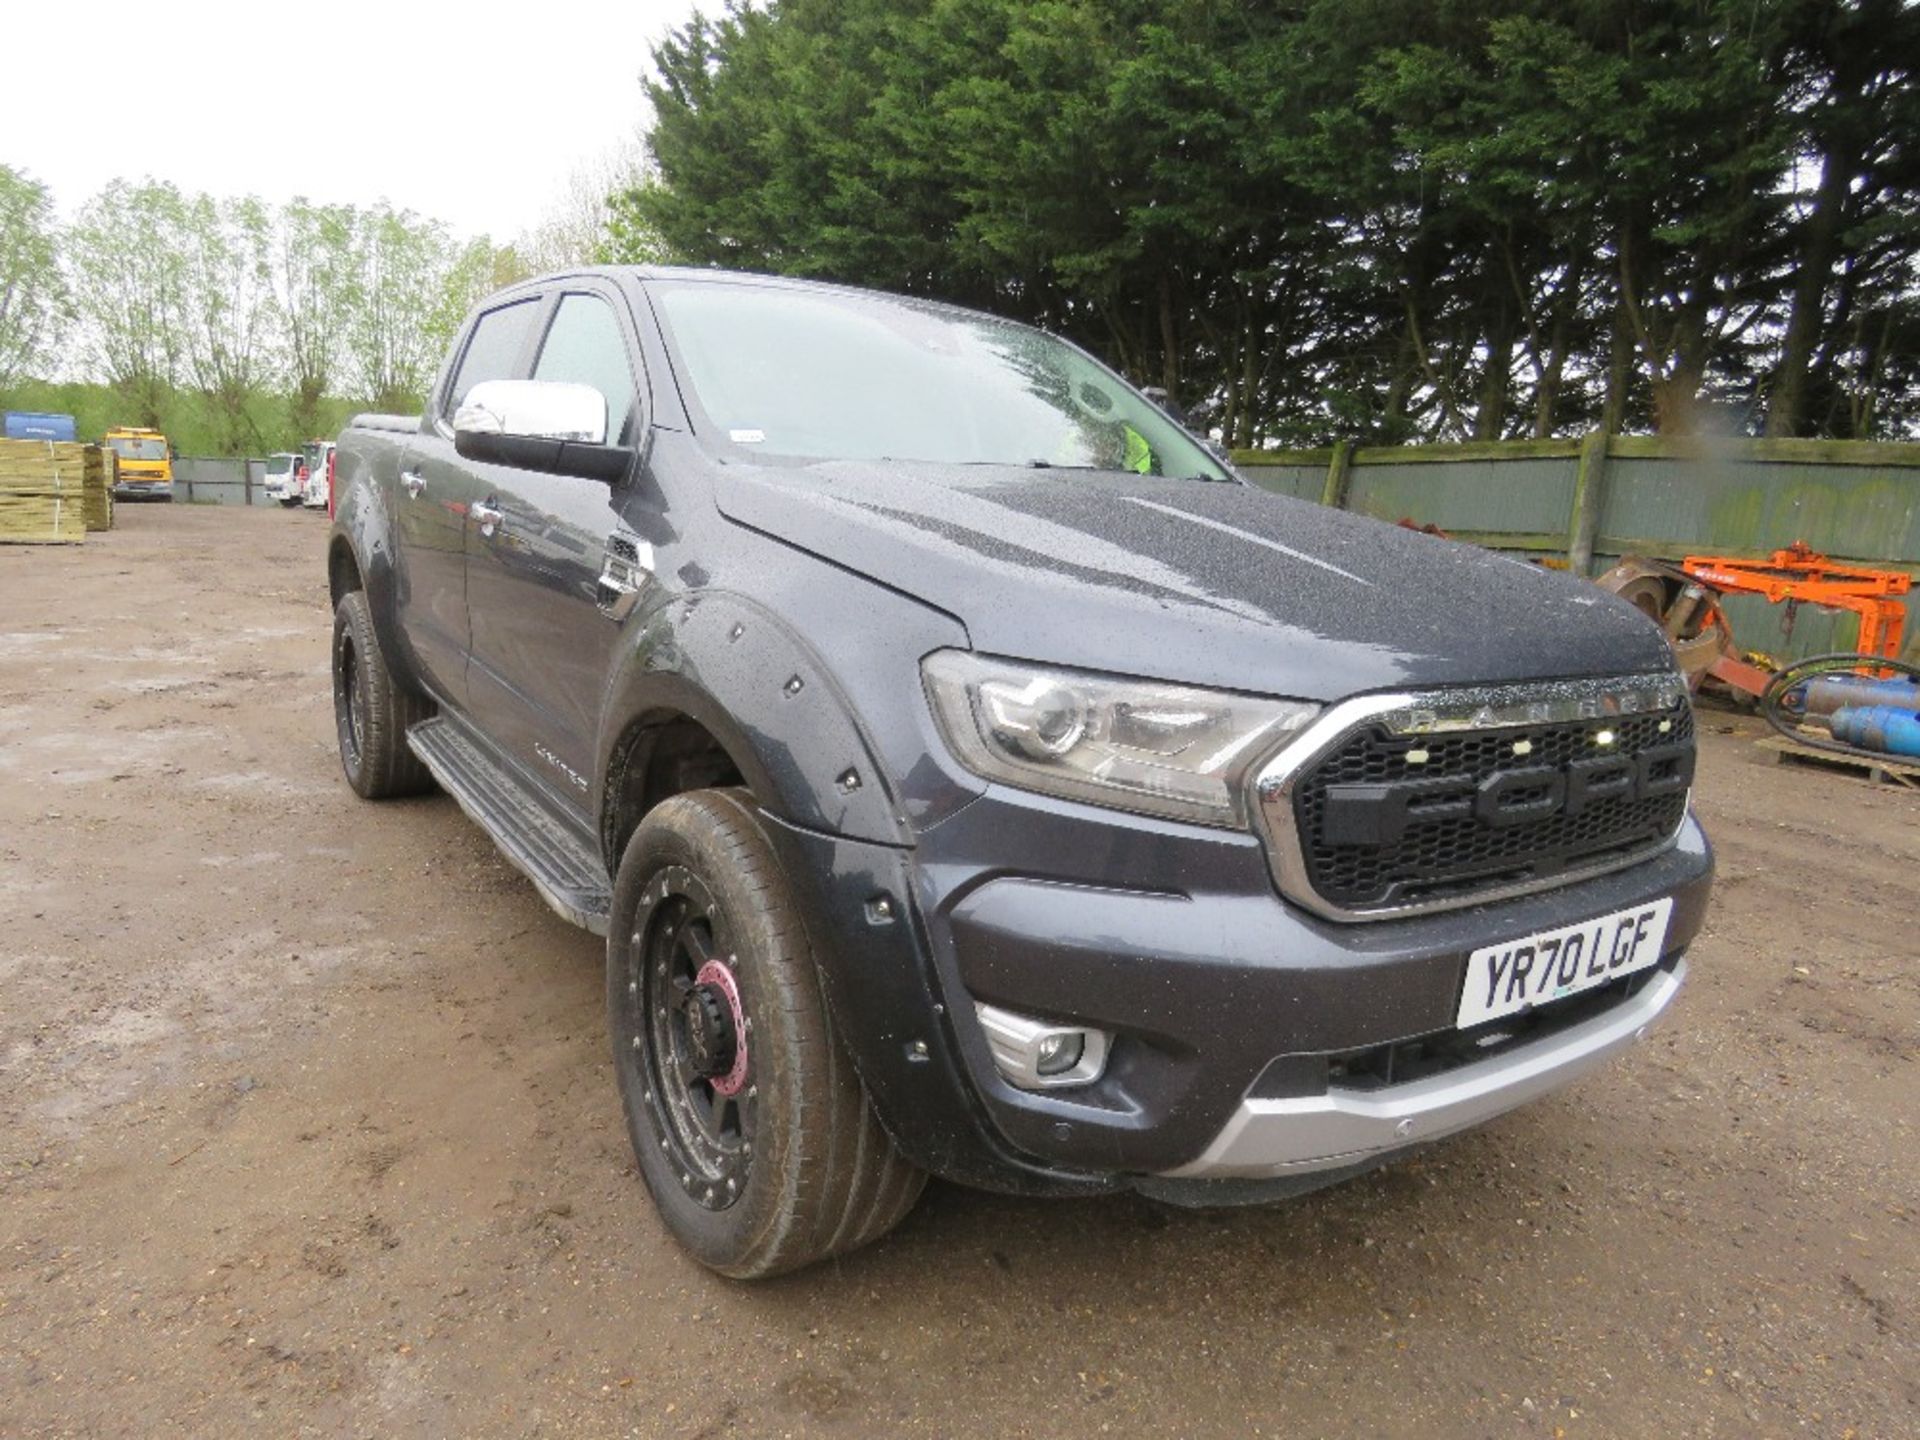 FORD RANGER LIMITED EDITION DOUBLE CAB PICKUP, AUTOMATIC, REG:YR70 LGF. 110,287 REC MILES. 2 LITRE